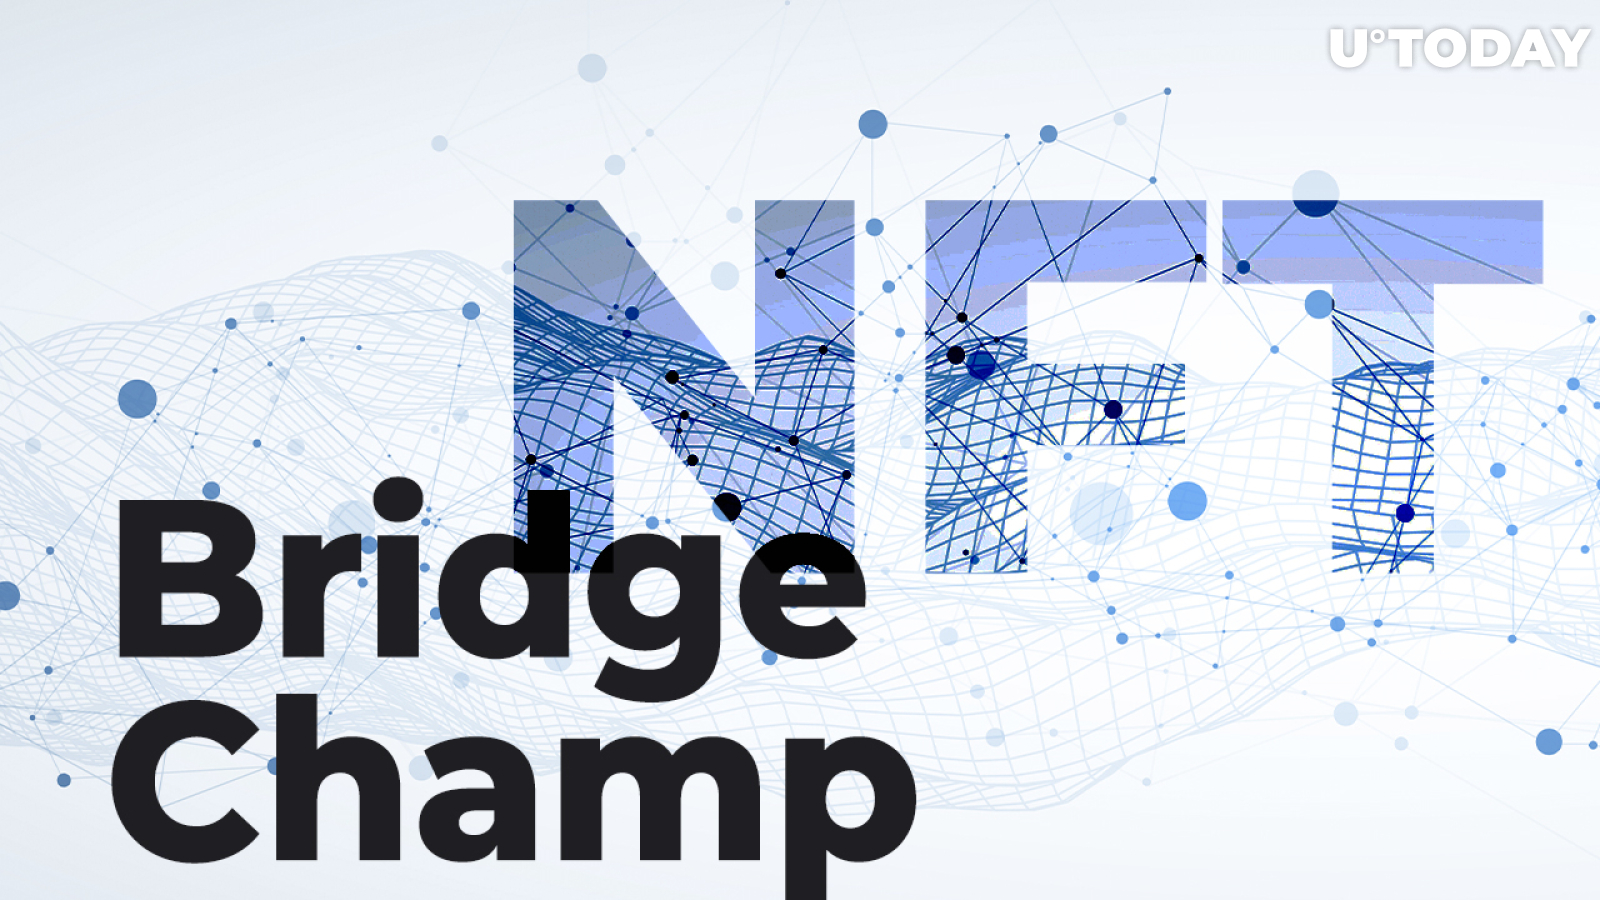 Bridge Champ to Host Online Tournaments with NFT Integrations in 2022: Details